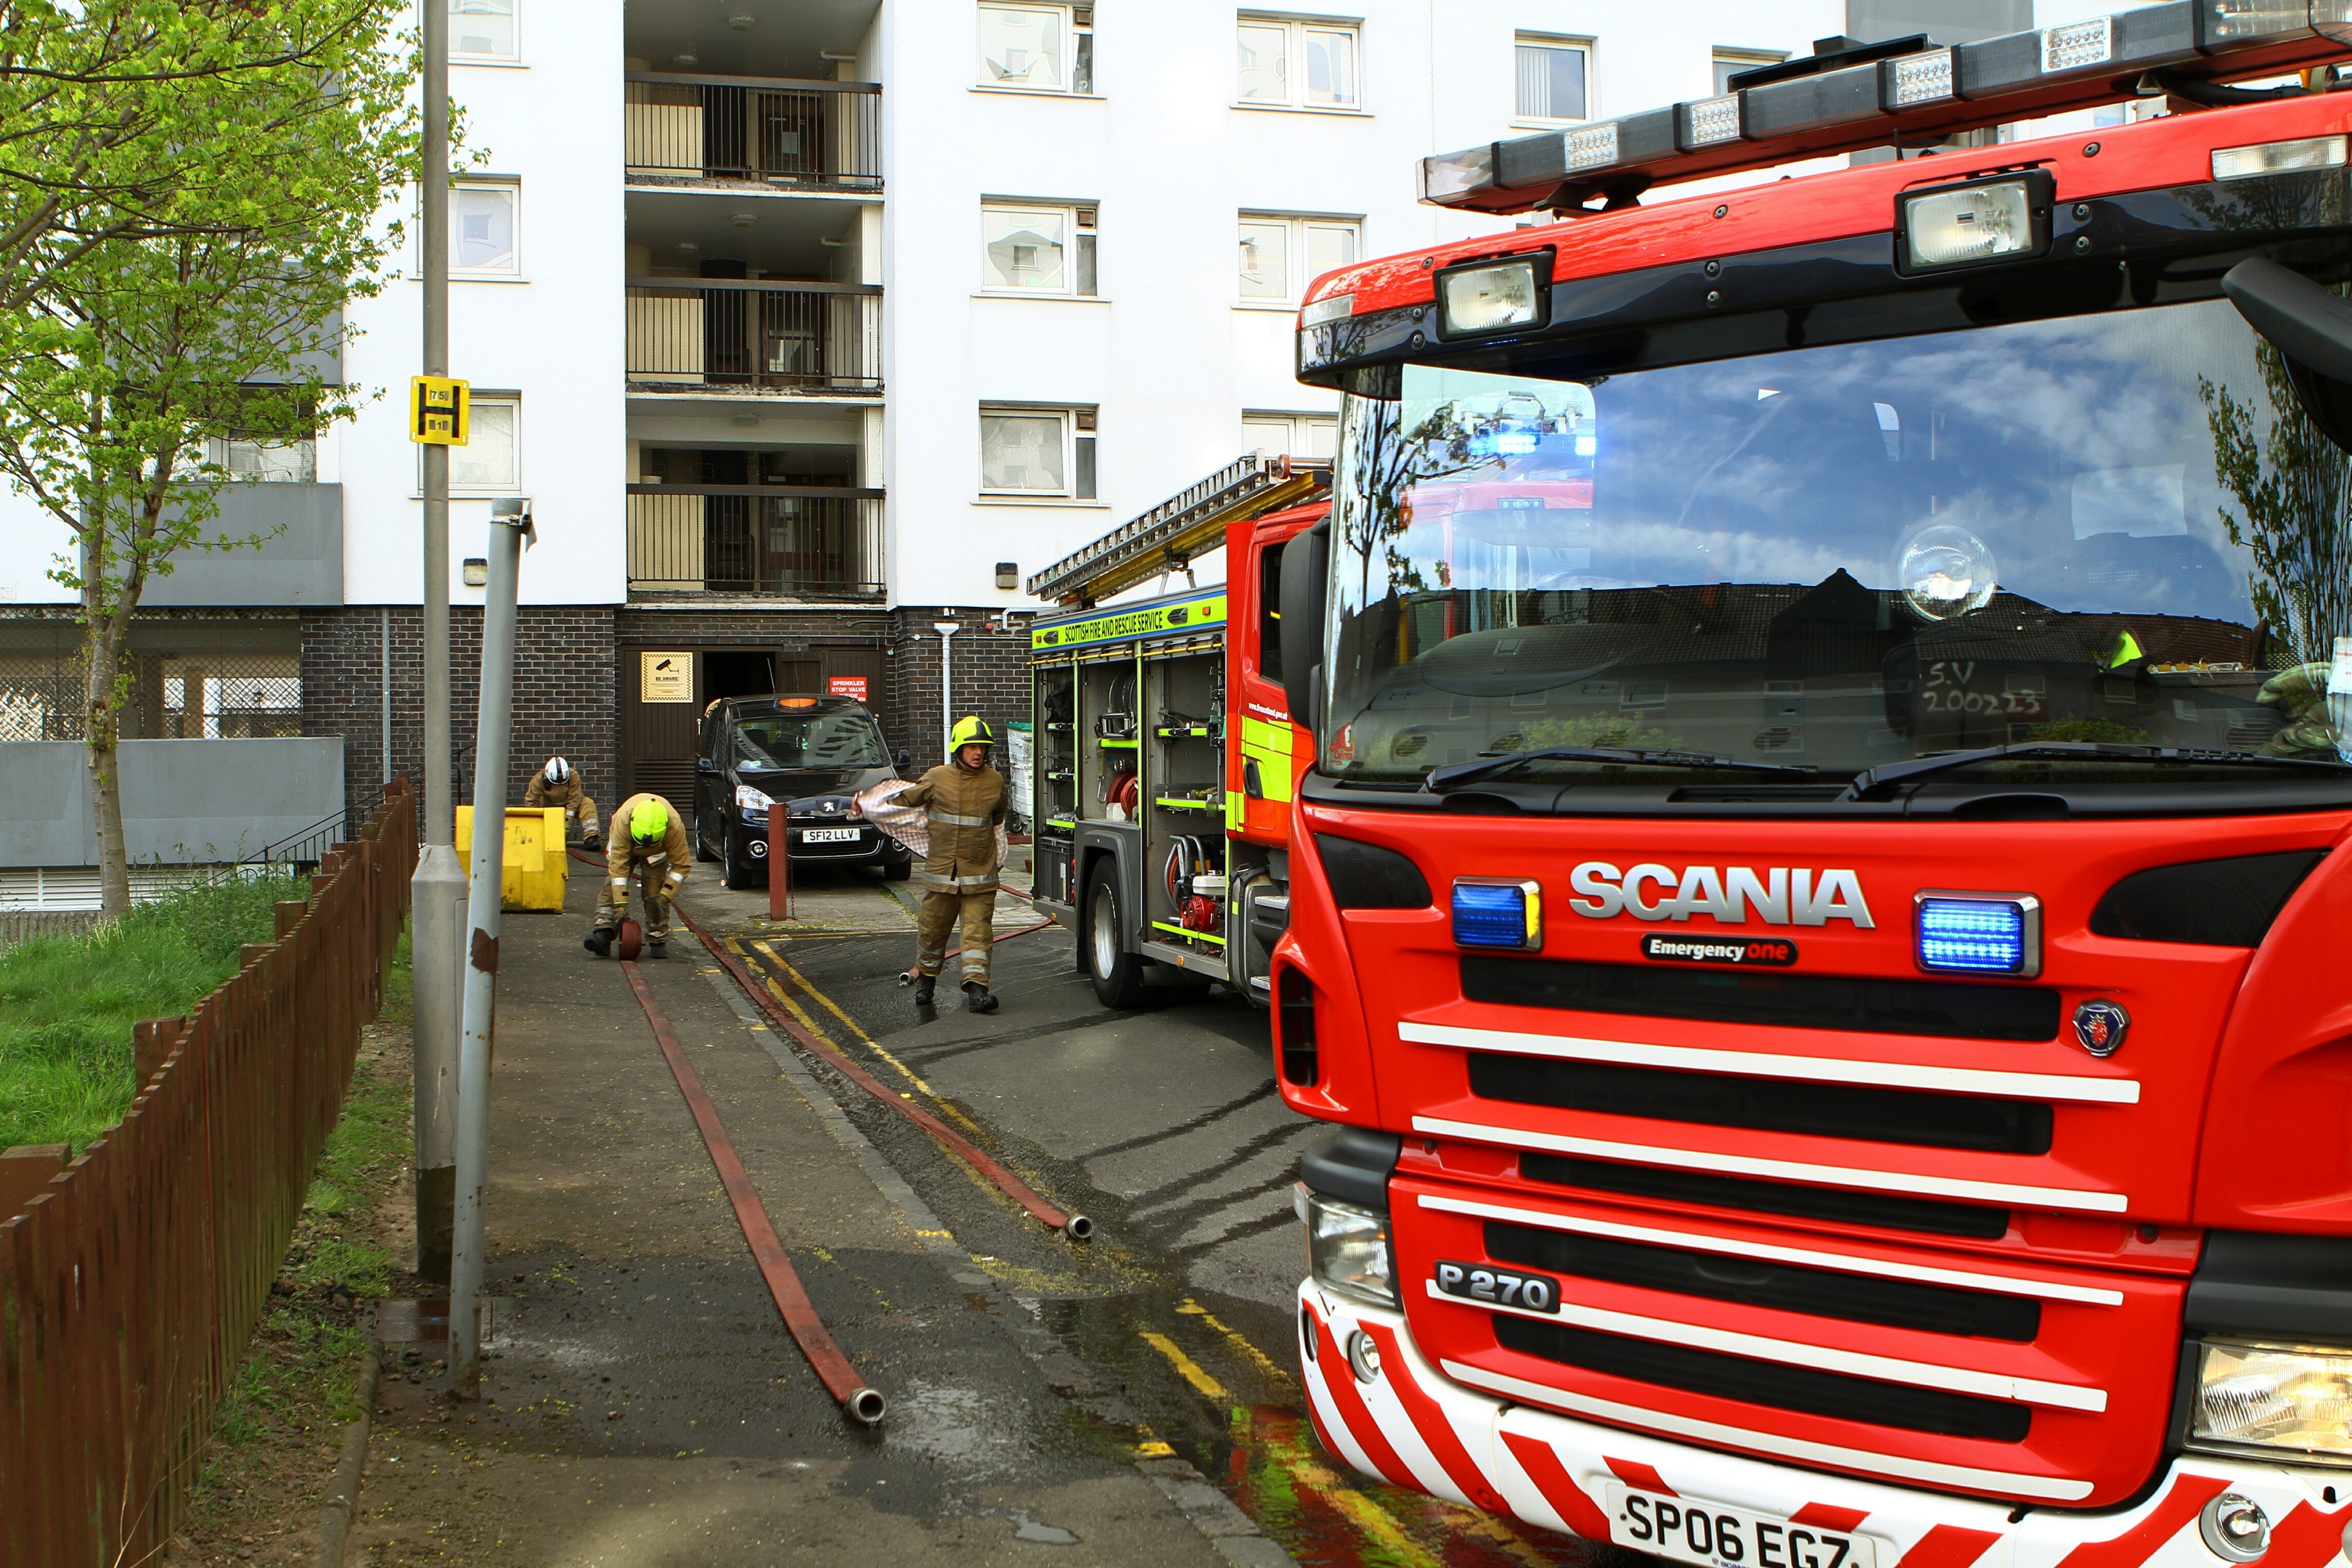 Fire fighters at Bonnethill court.